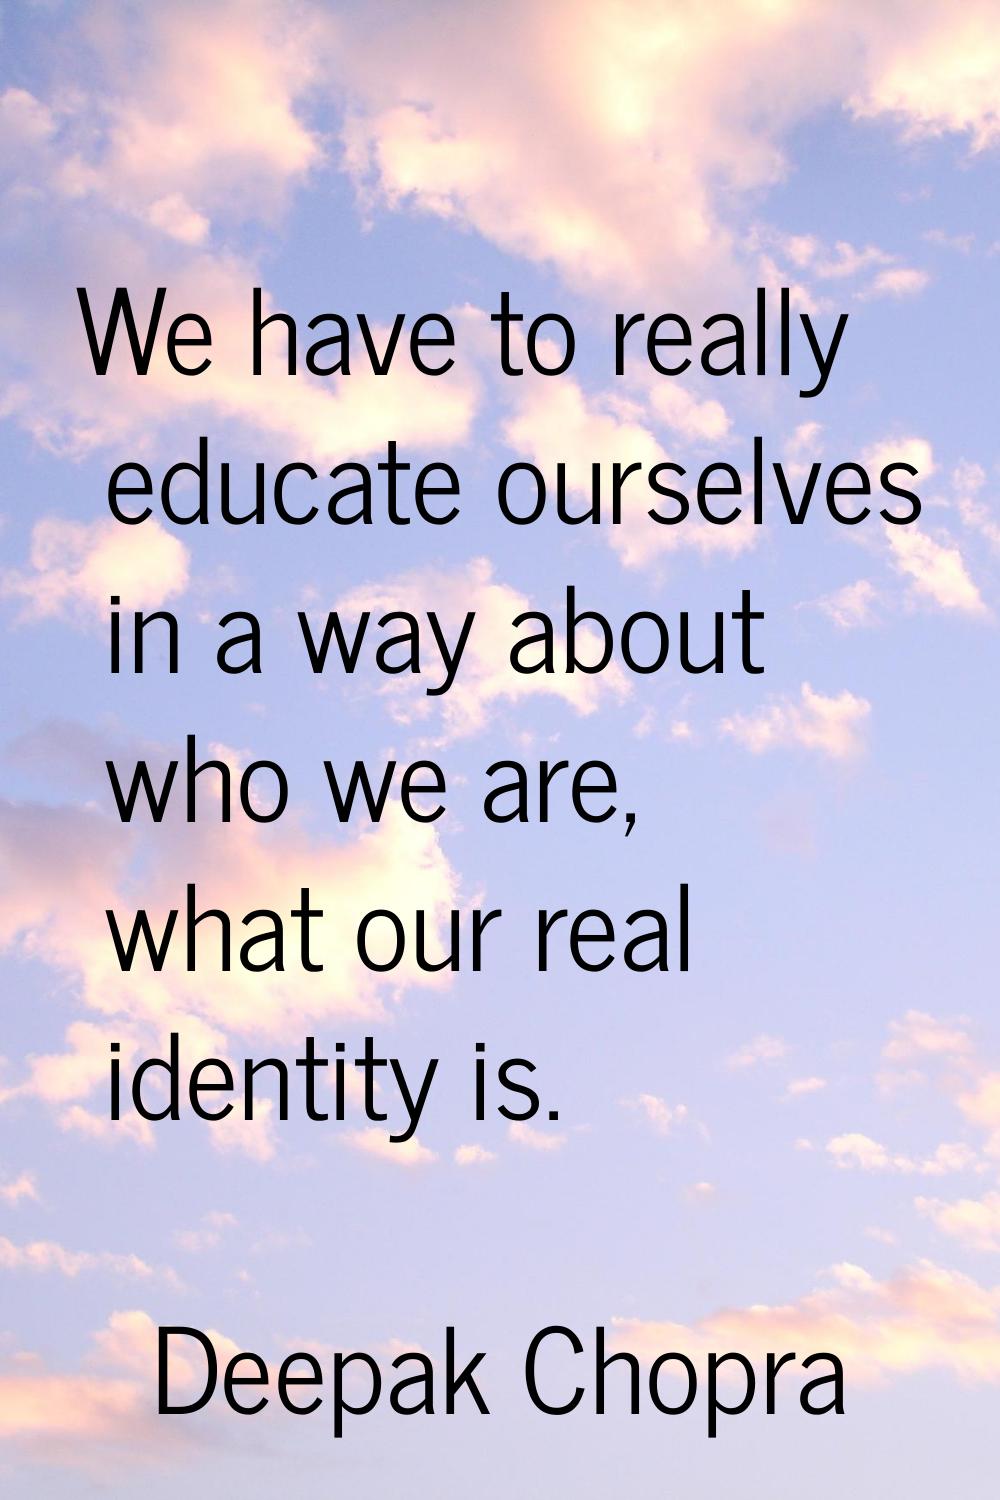 We have to really educate ourselves in a way about who we are, what our real identity is.